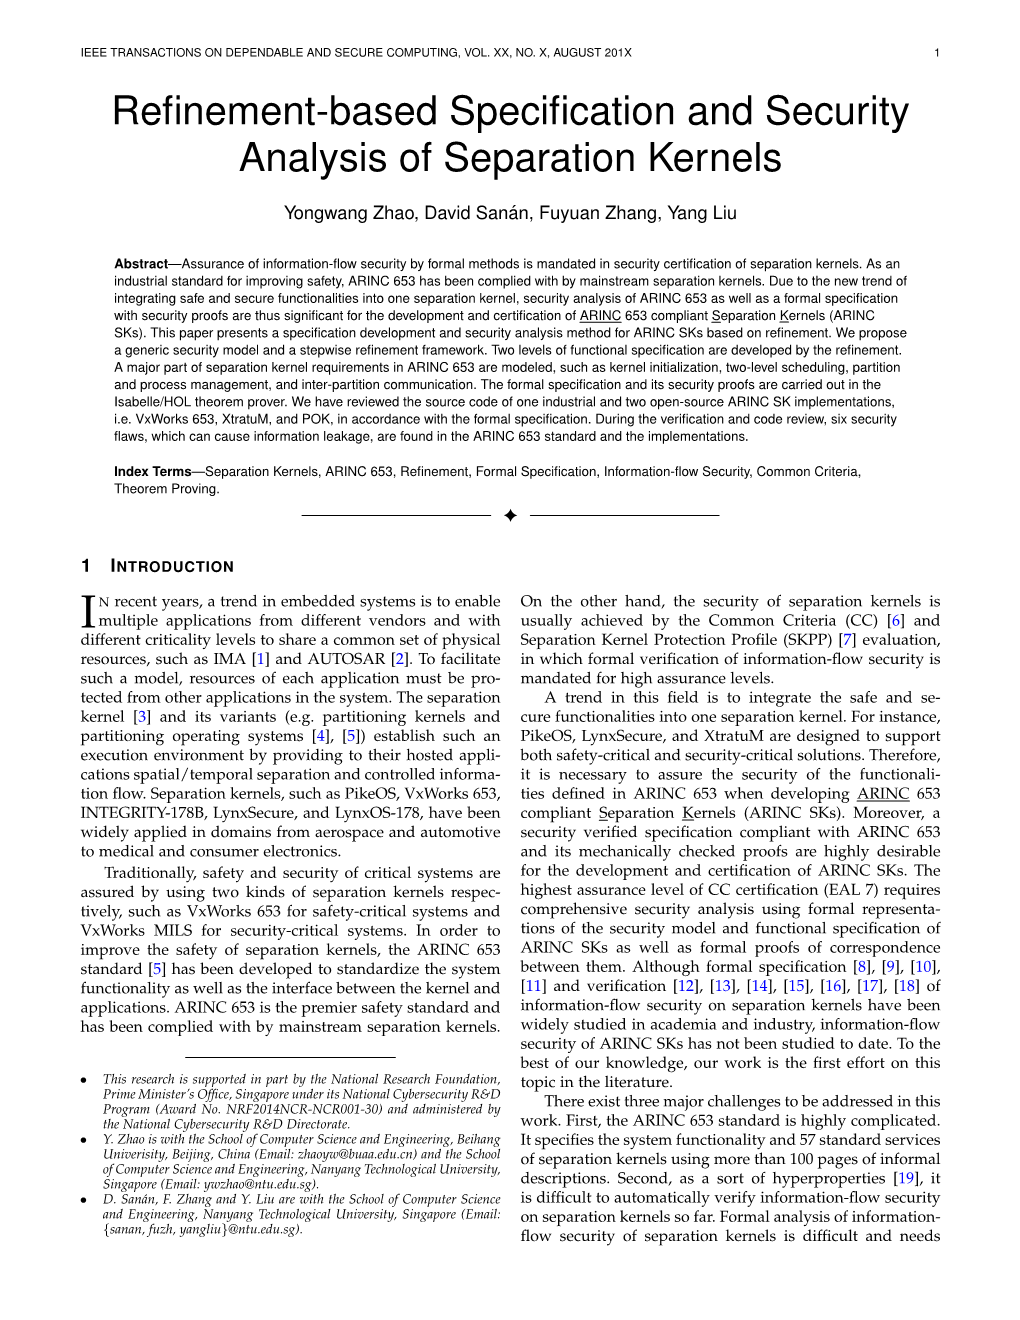 Refinement-Based Specification and Security Analysis of Separation